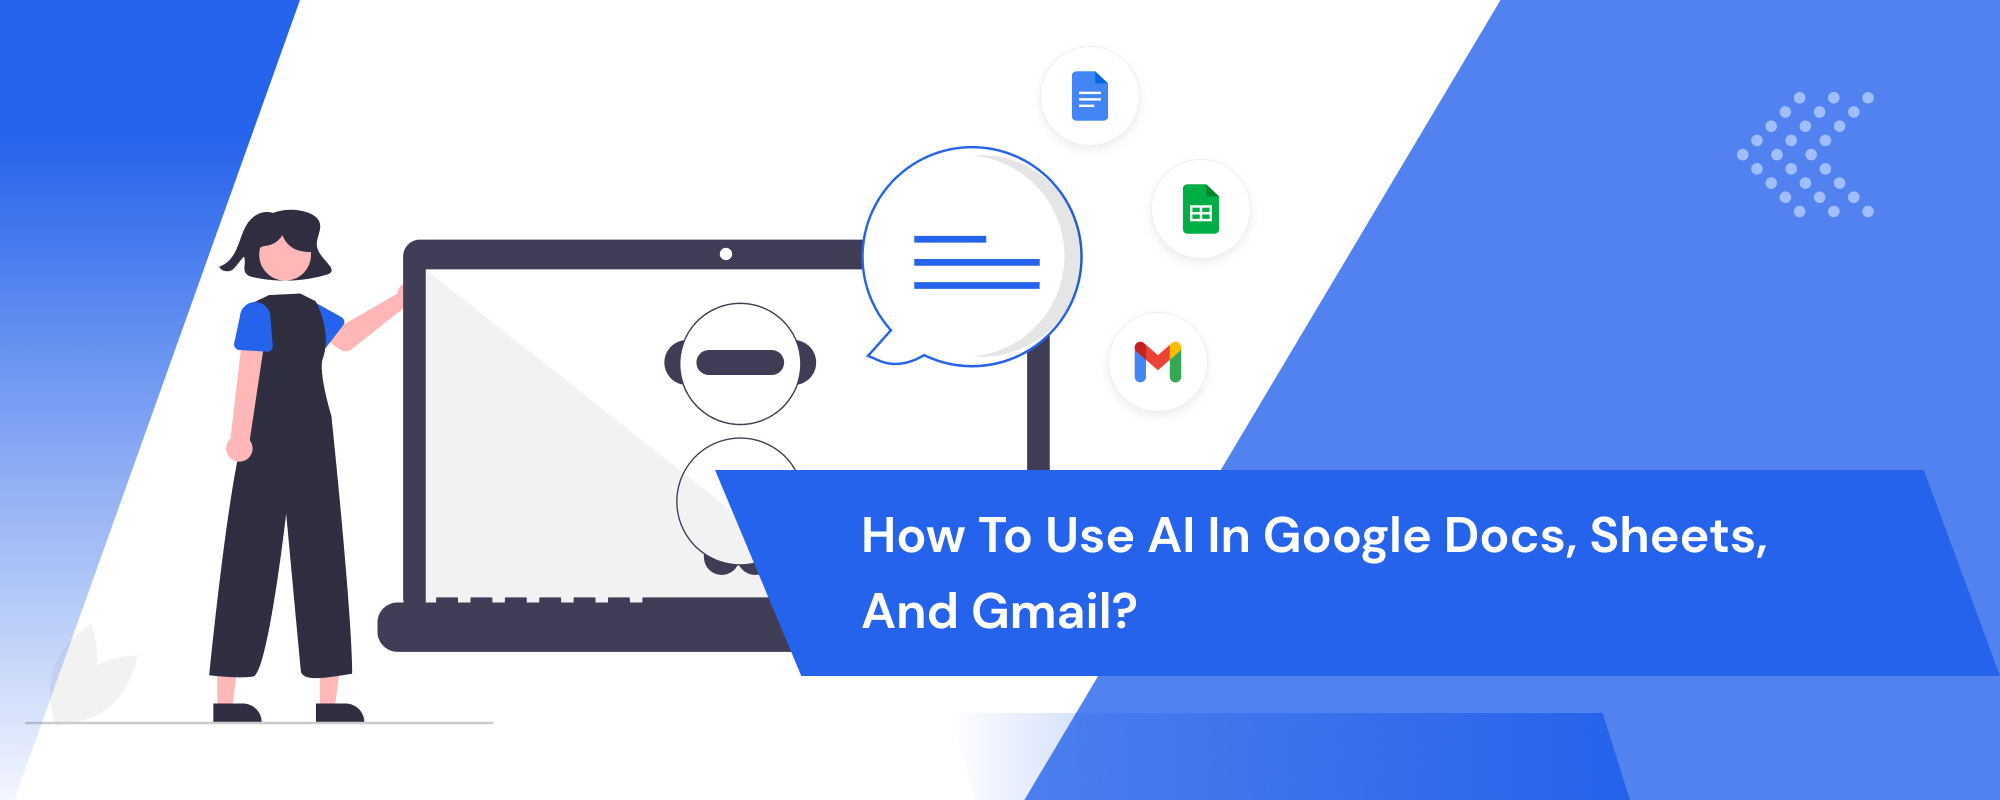 How to Use AI in Google Docs, Sheets, and Gmail?